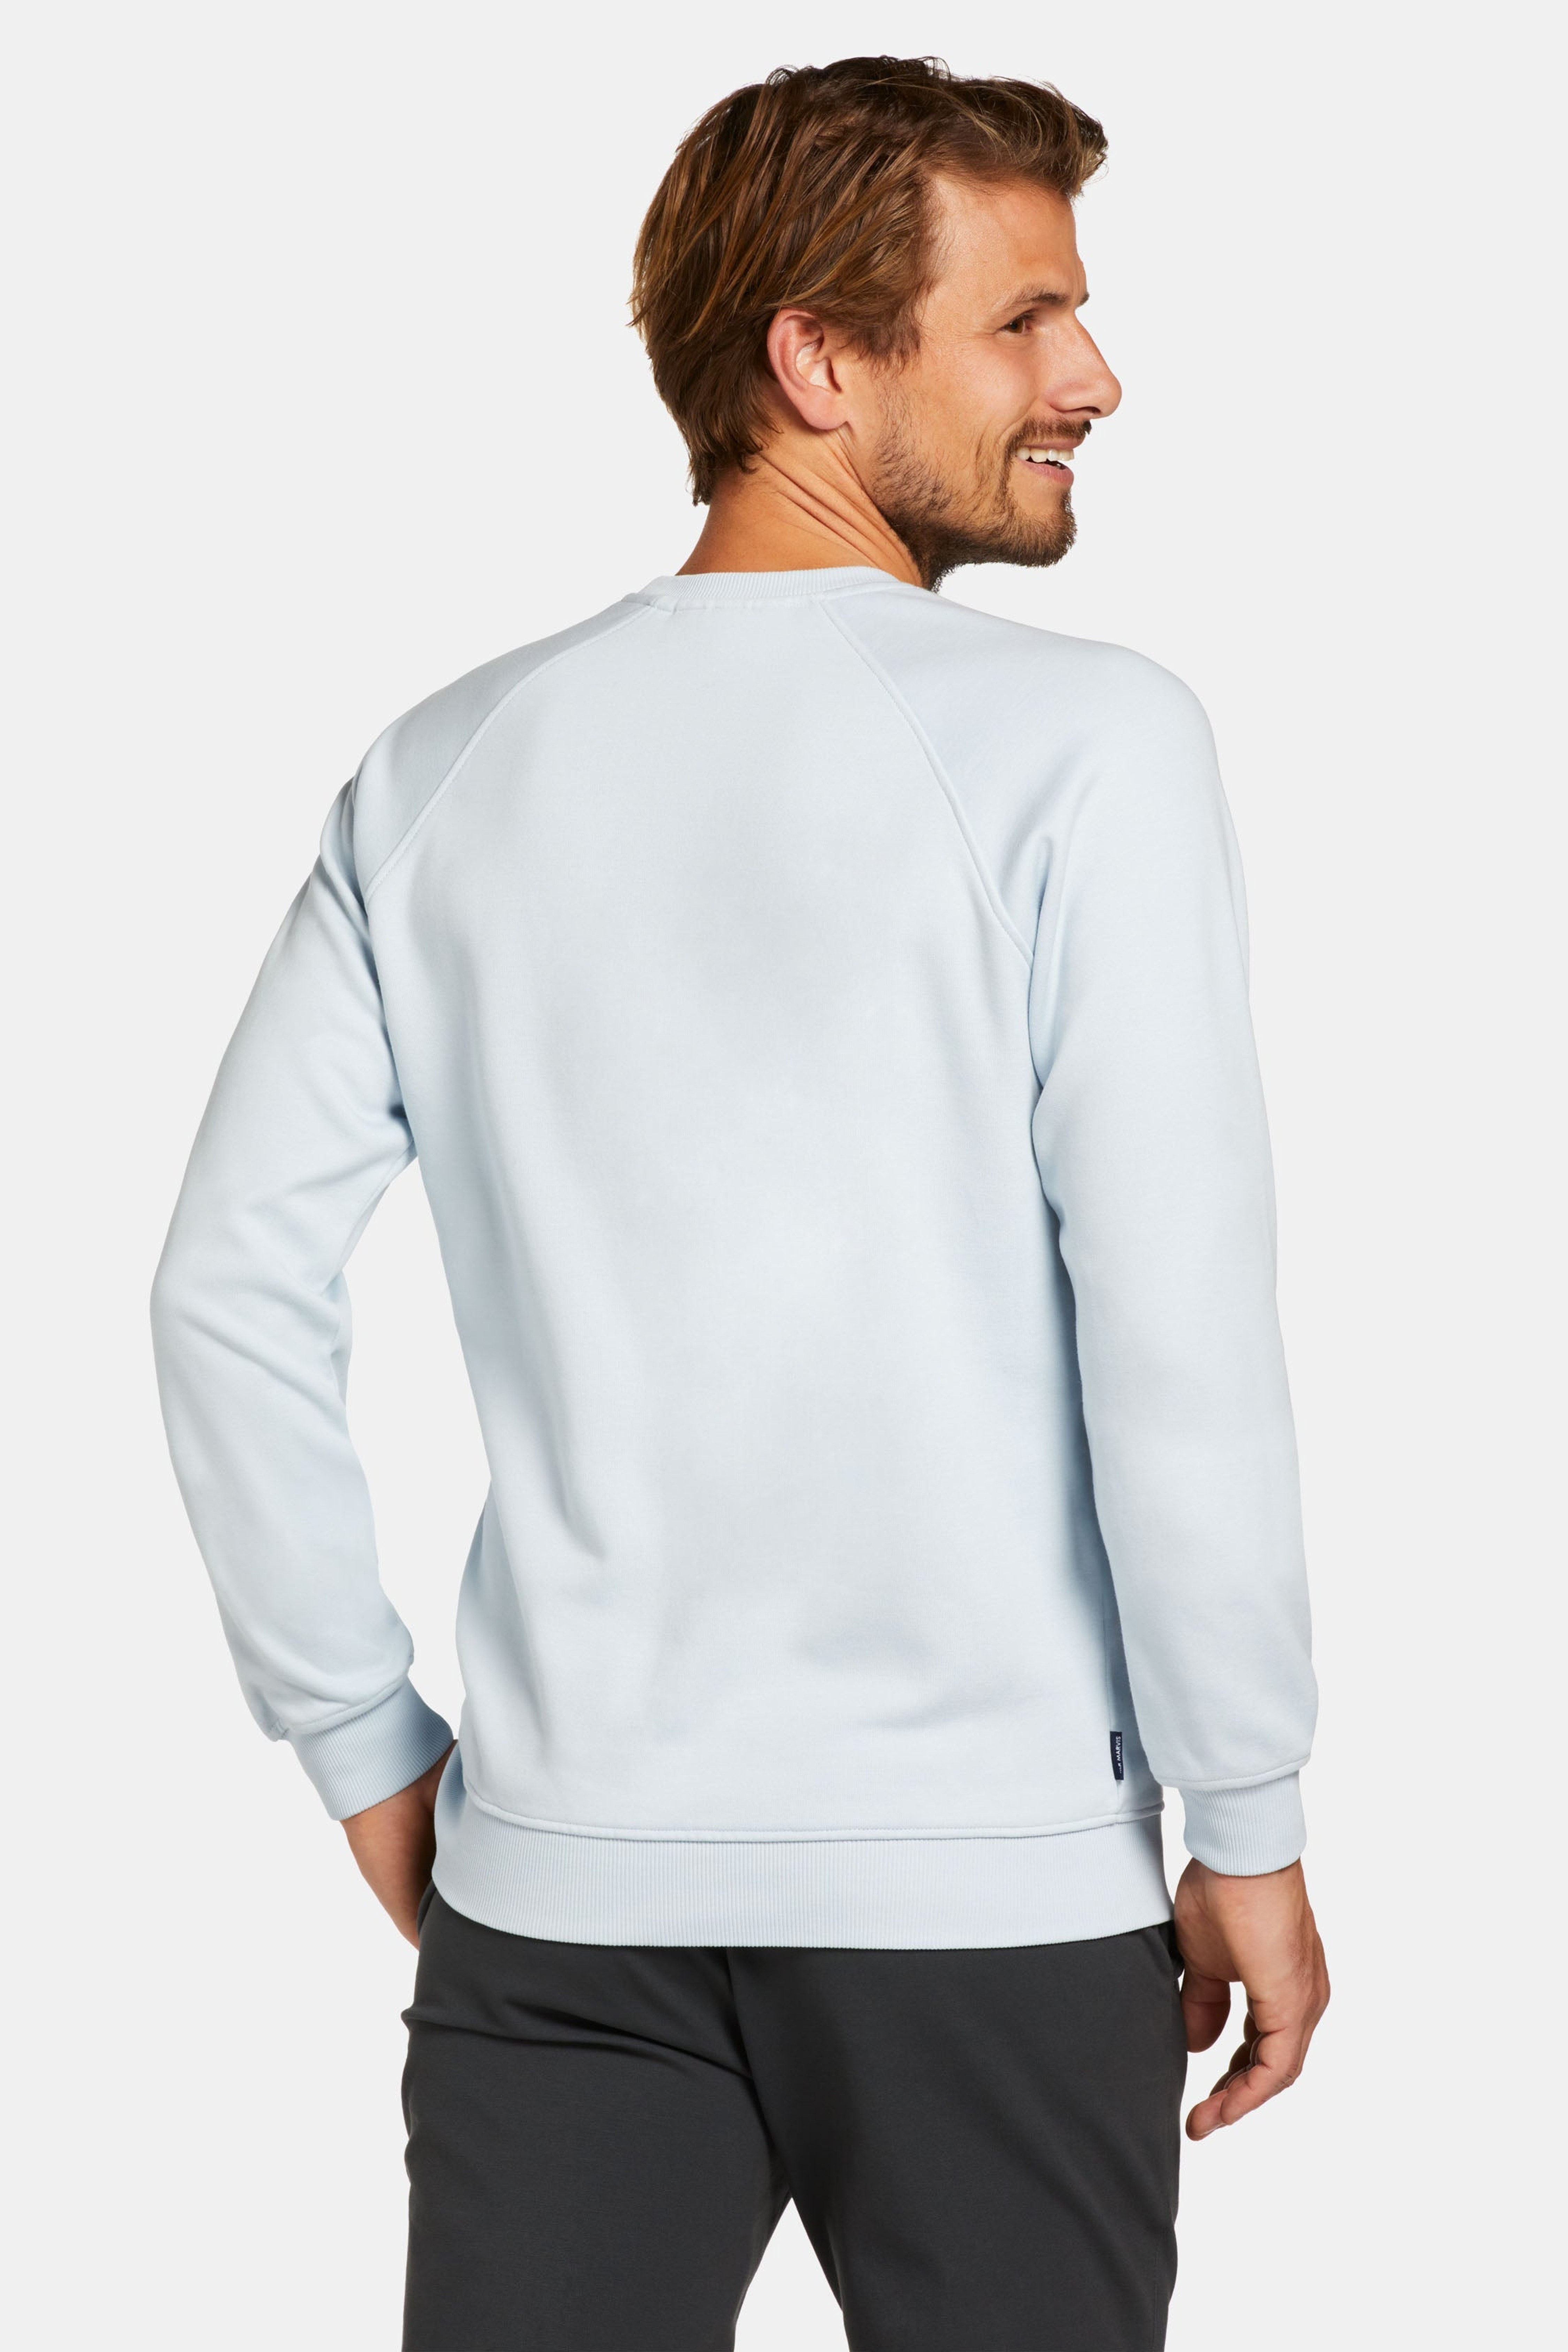 Avenues * The Easy Sweater